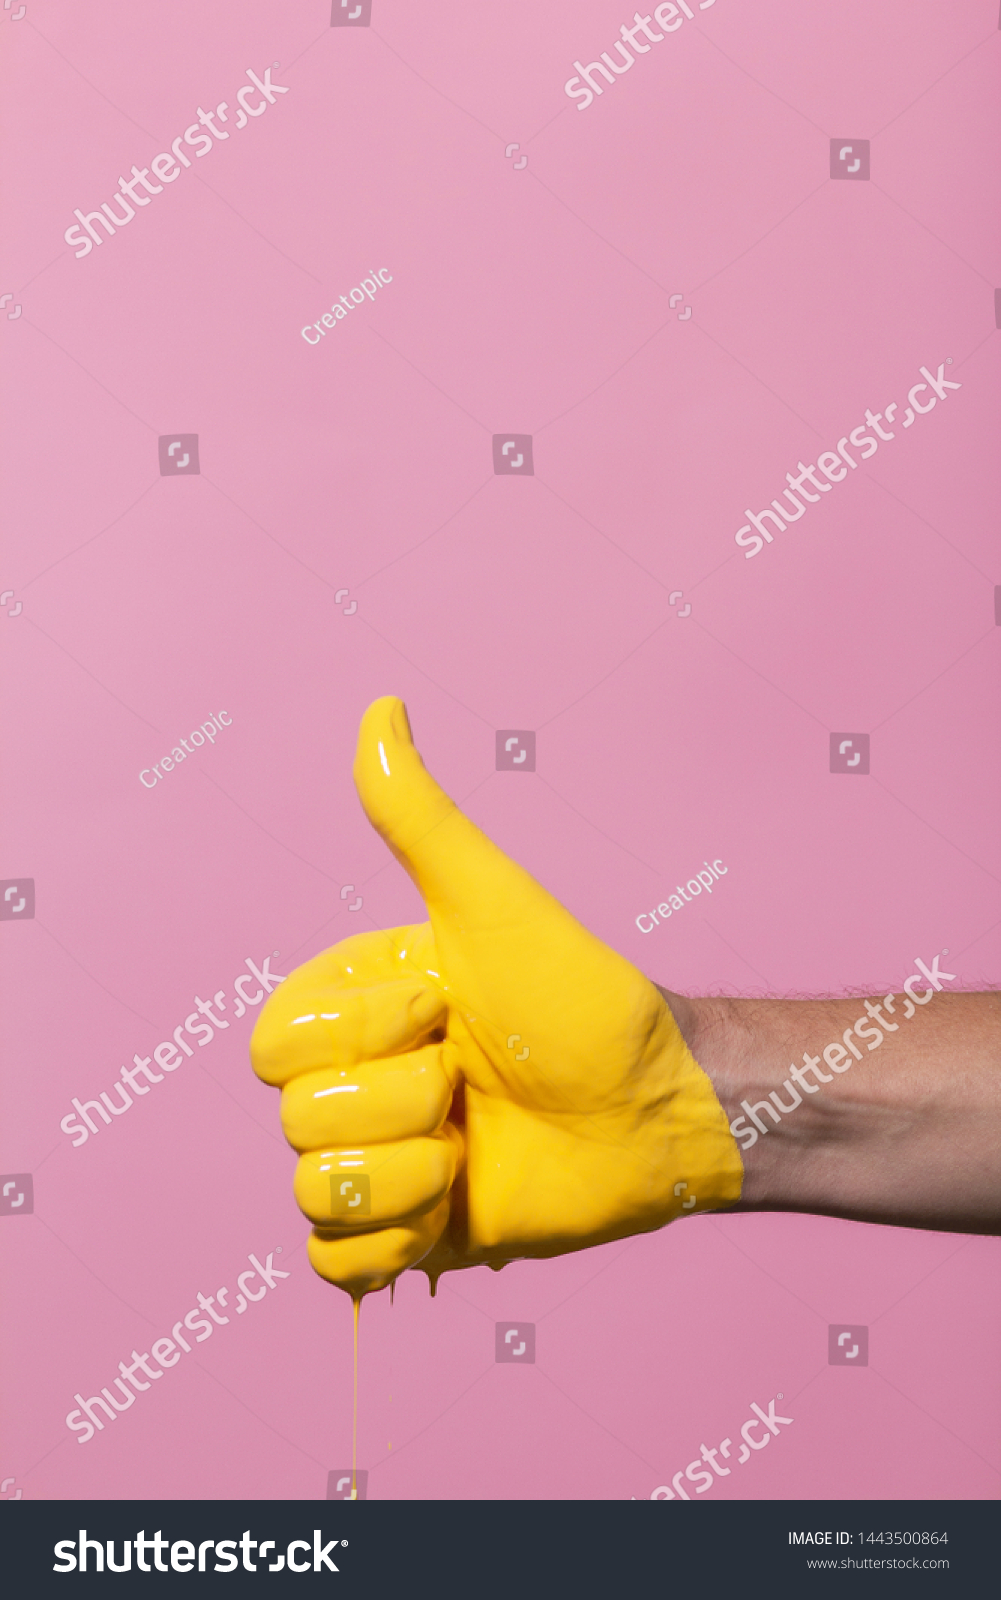 male hand showing sign thumb up with paint flowing down on a colored background. creative idea, creative concept, gesture "class" #1443500864